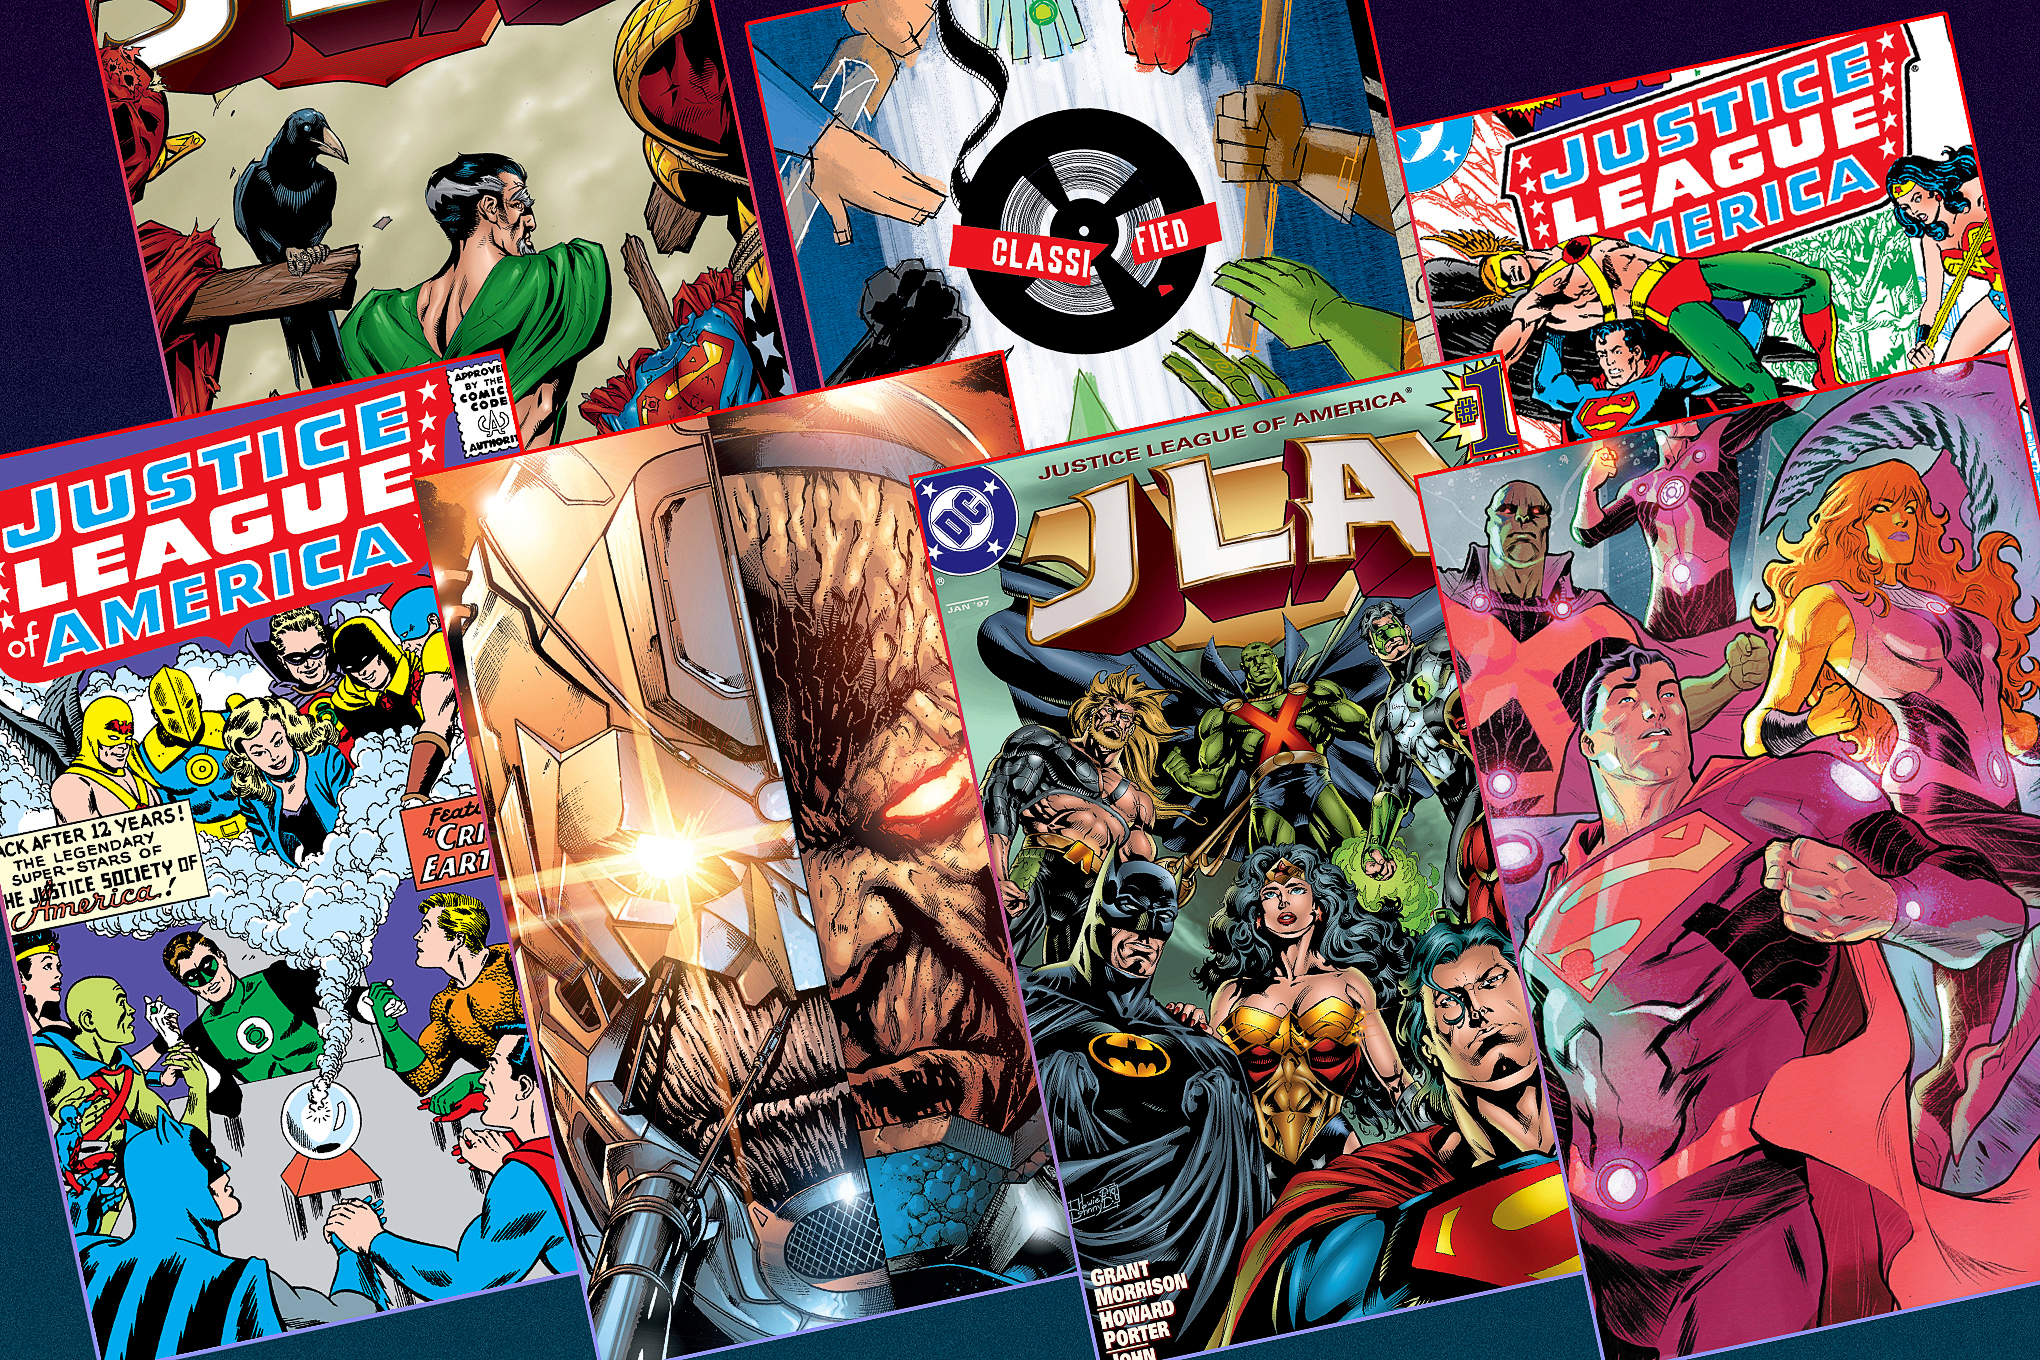 Graphic featuring seven different covers of Justice League comics